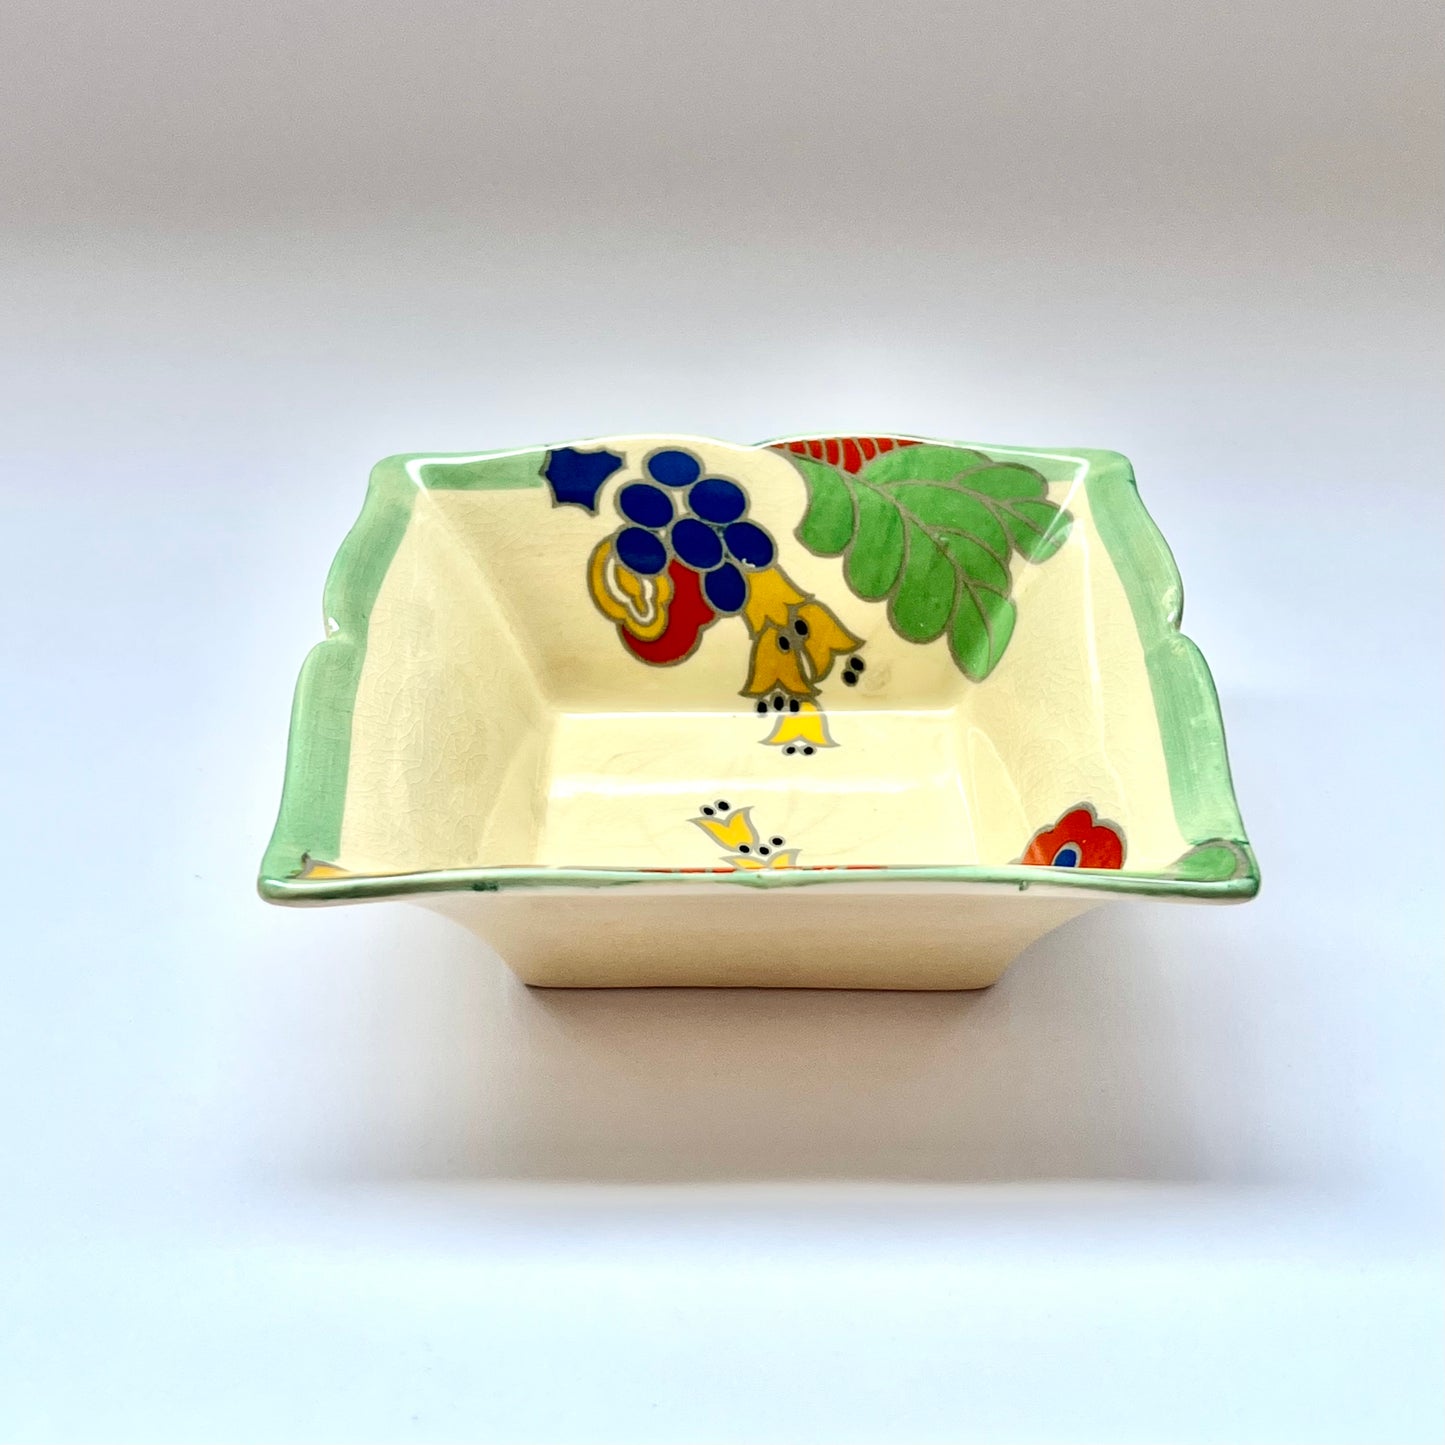 1930s Art Deco Royal Doulton Art Deco porcelain sweetmeat dish *as-is* in Caprice Pattern